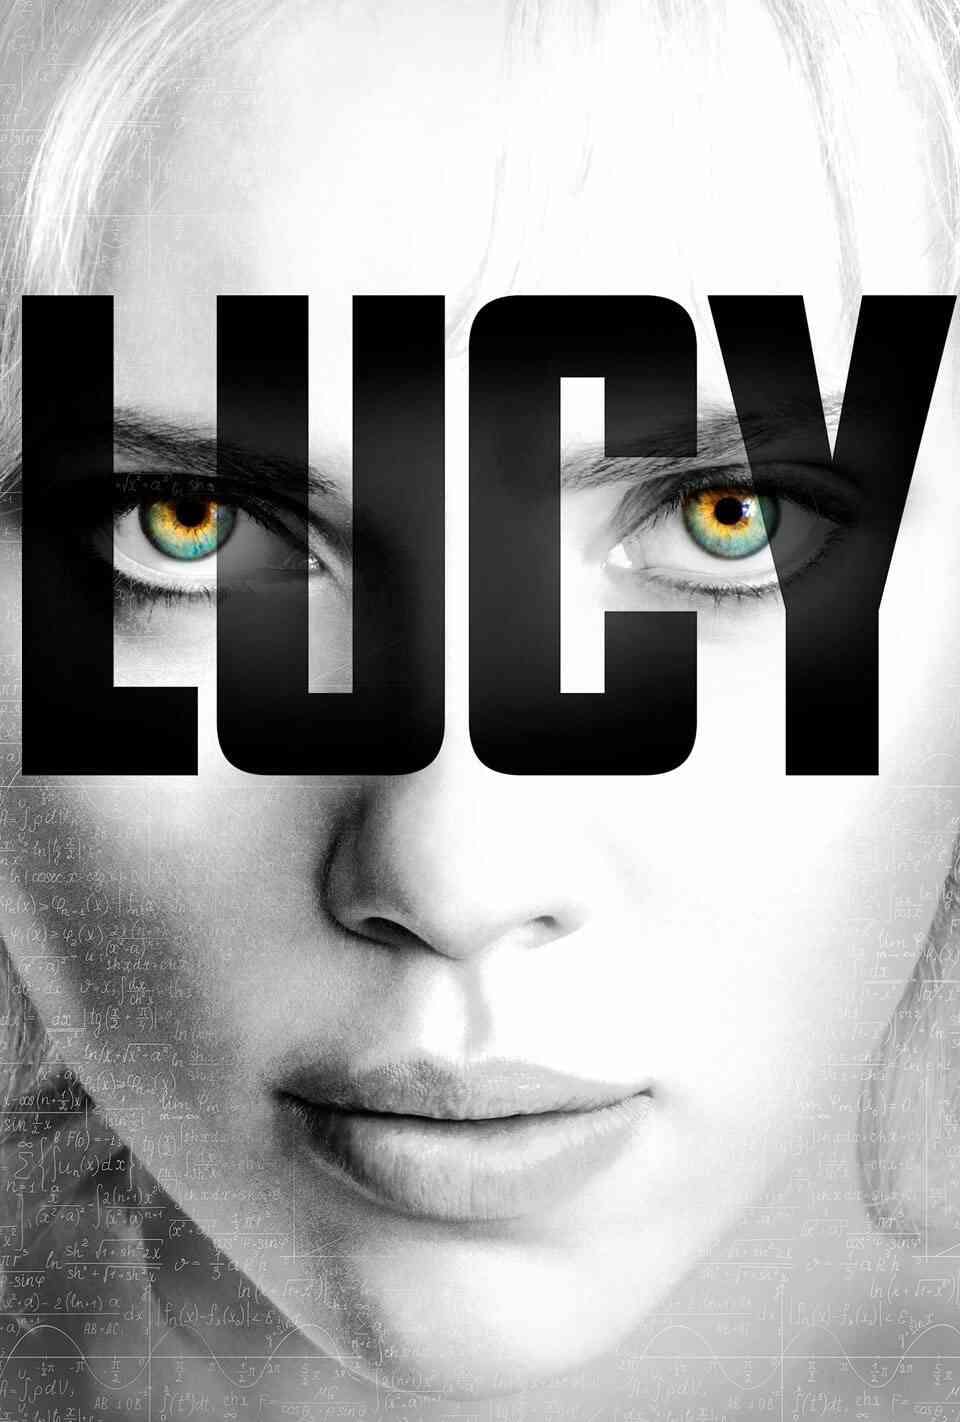 Read Lucy screenplay (poster)